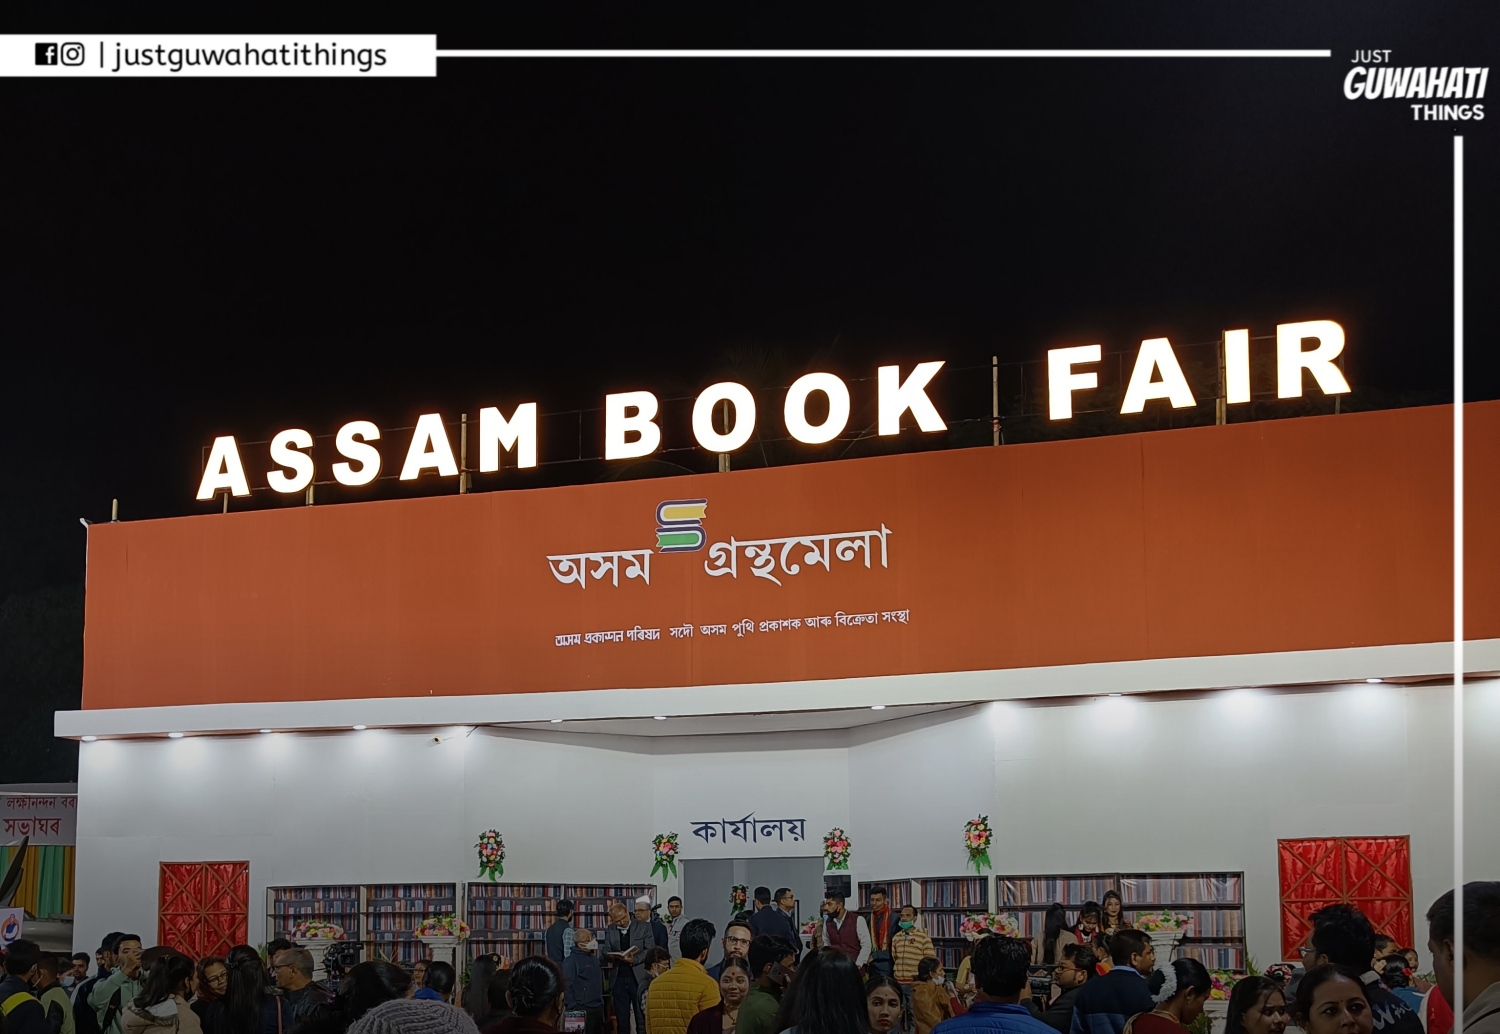 Books worth Rs. 1 Crore sold in Assam Book Fair in just 4 days Just